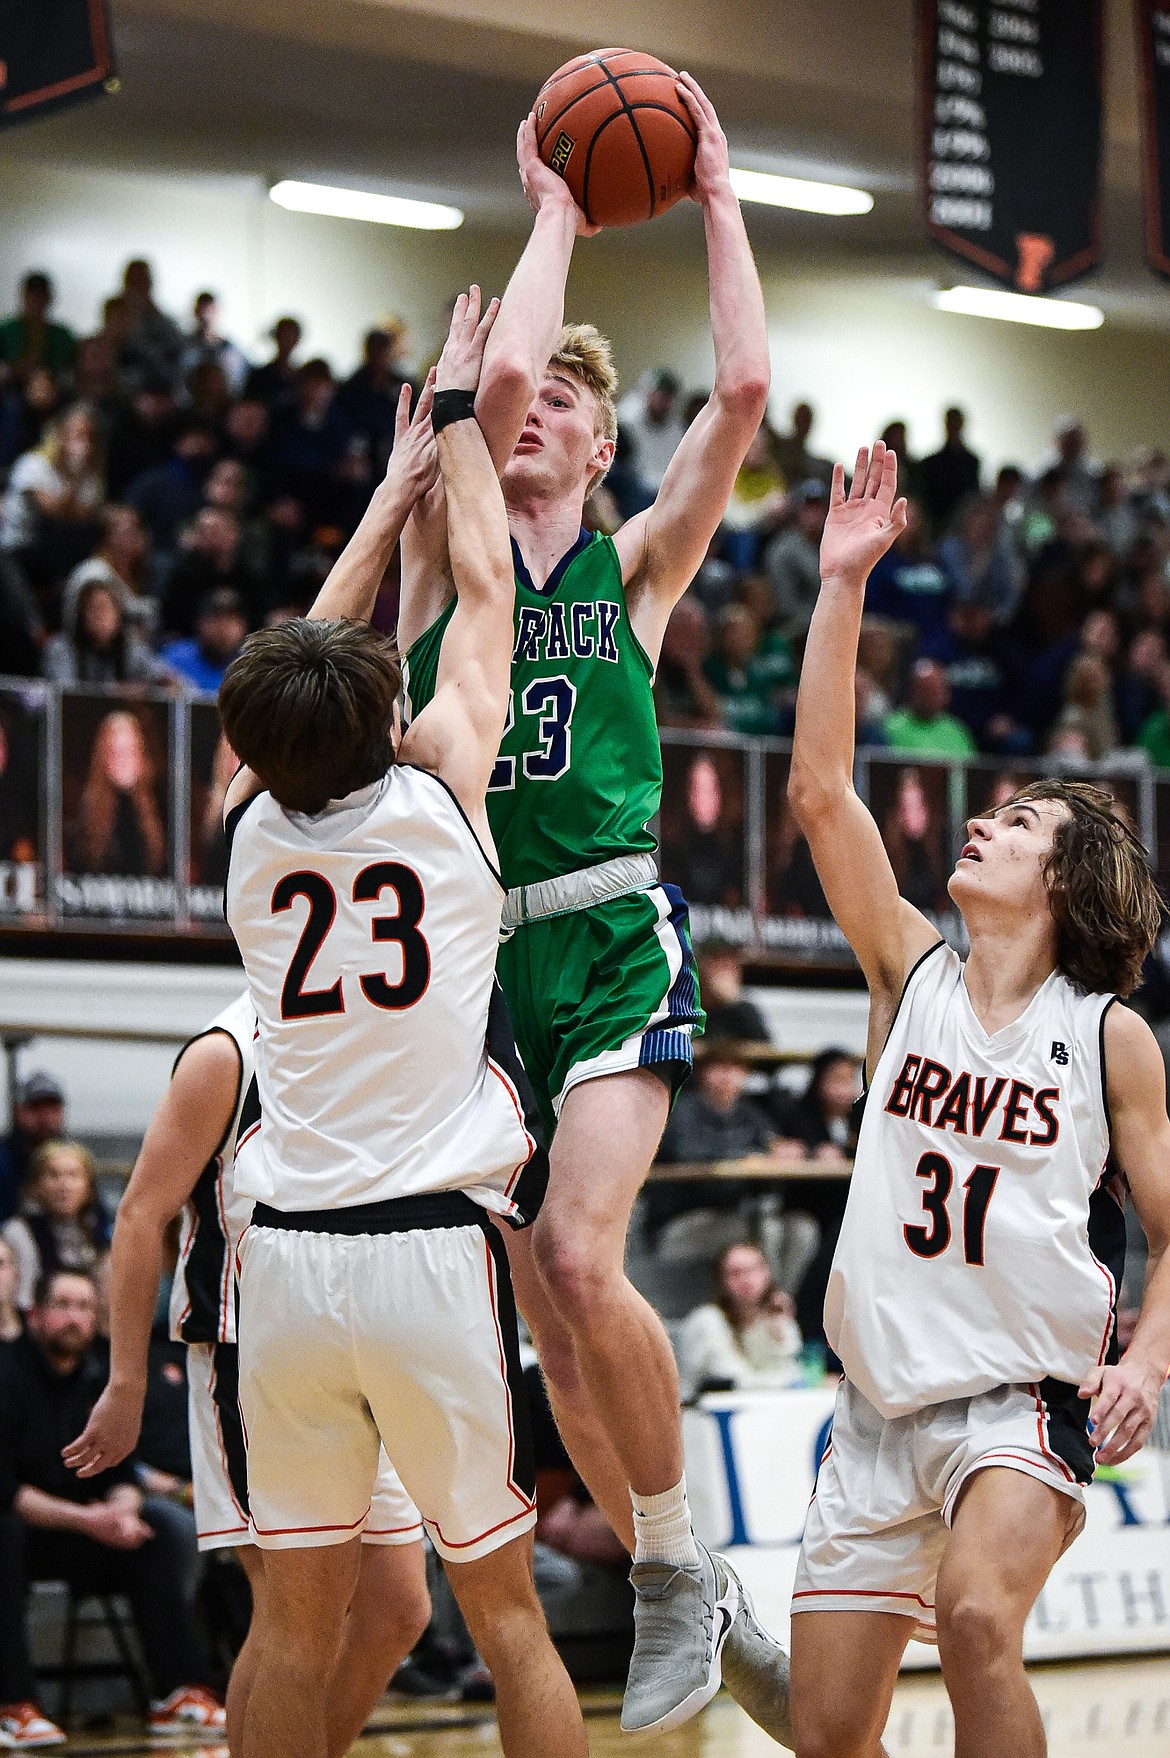 Glacier's Jackson Endresen (23) is fouled on his way to the basket in the first half against Flathead at Flathead High School on Friday, Jan. 19. (Casey Kreider/Daily Inter Lake)